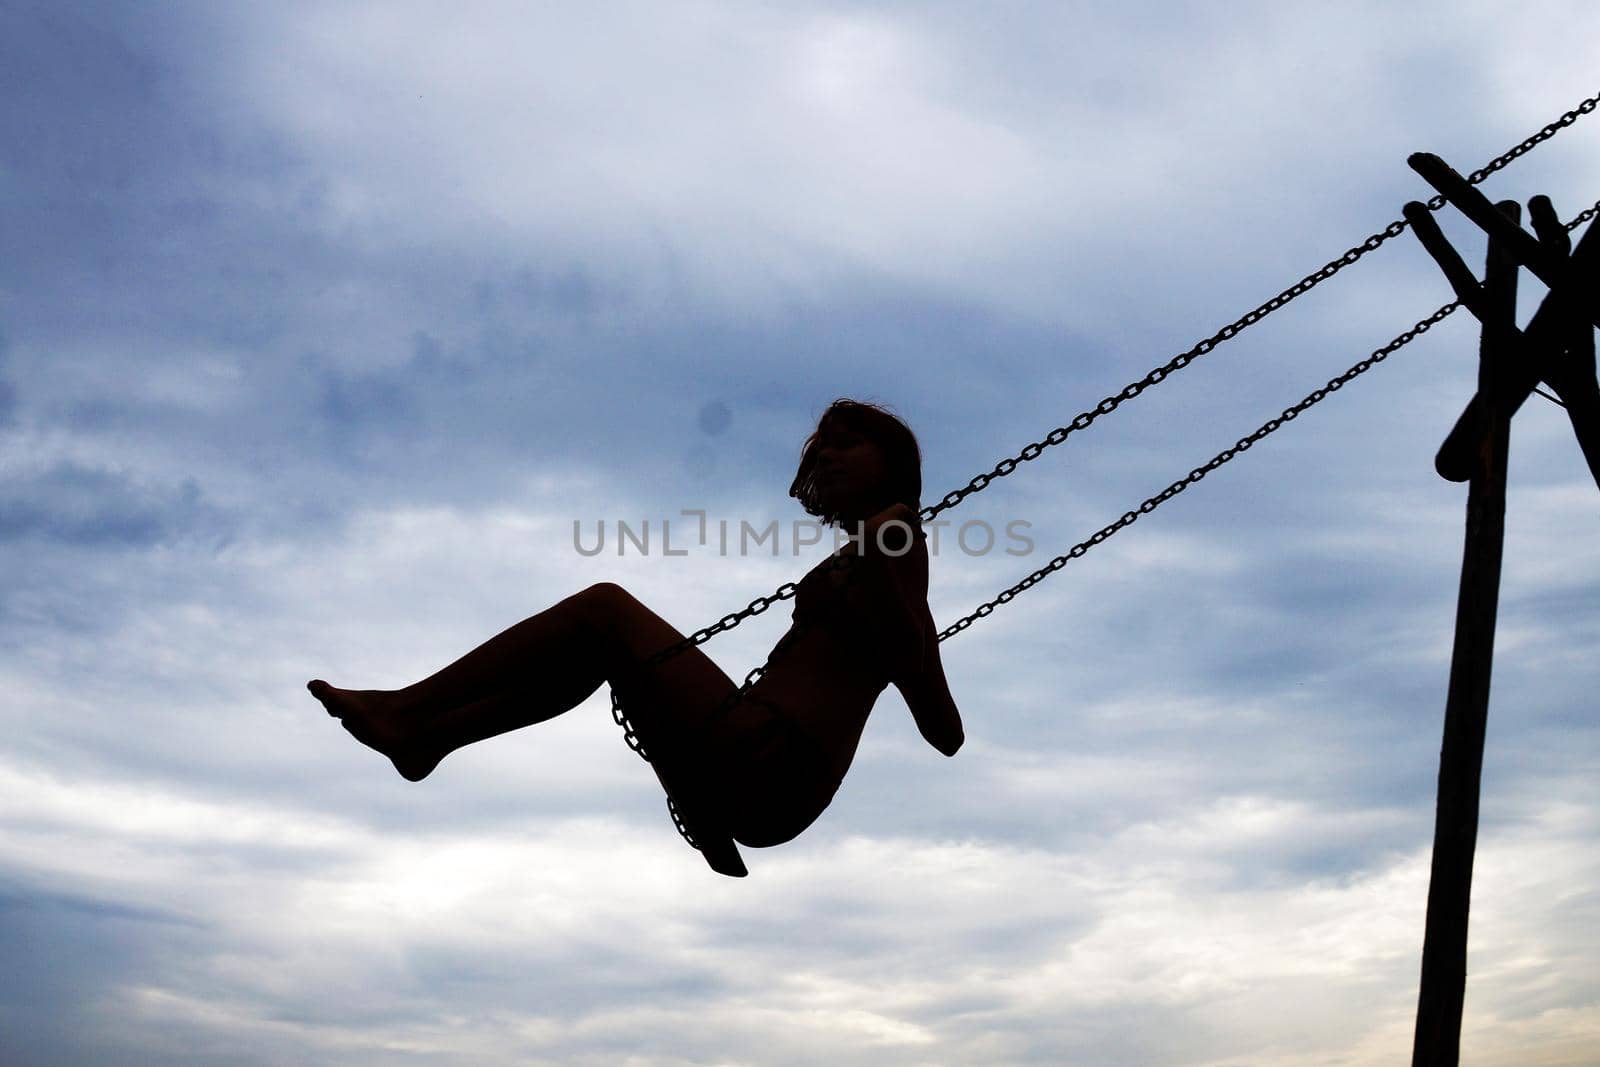 girl swinging on a swing, silhouette against a cloudy sky.